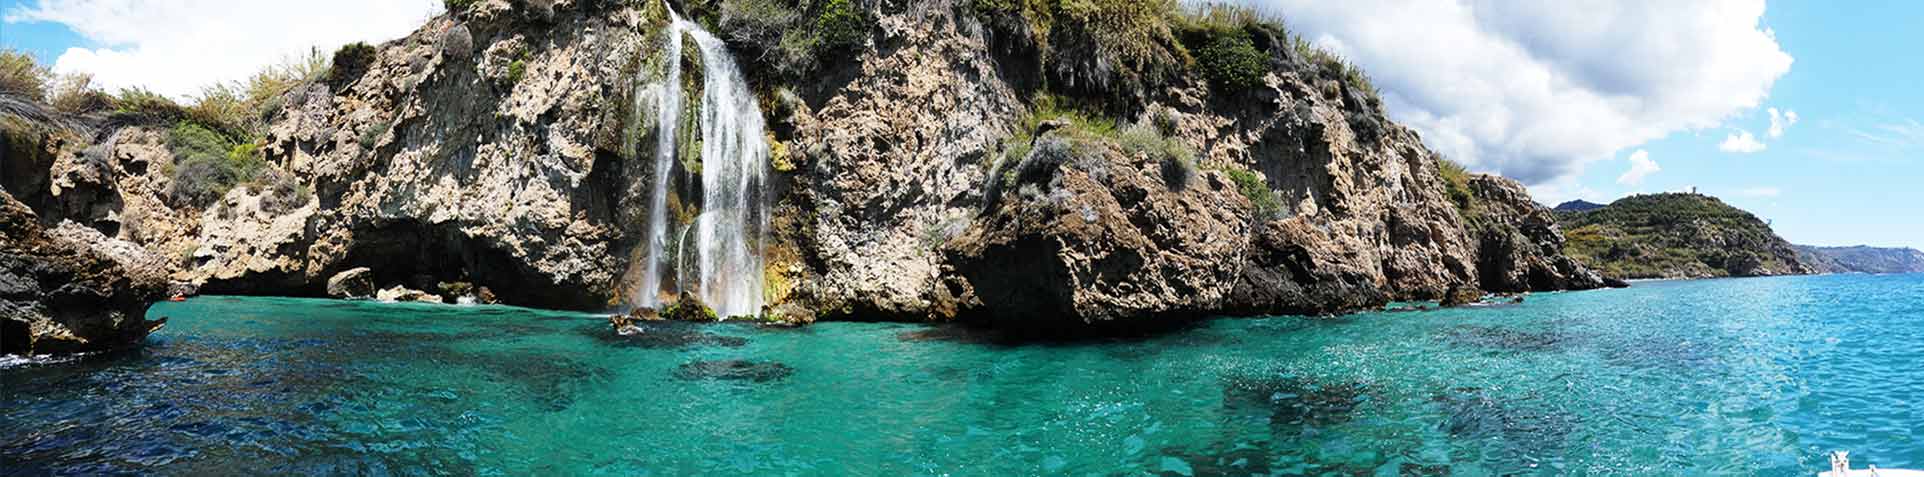 Spring Exclusive Private 3 hour Sightseeing Boat Trip to Maro Waterfalls